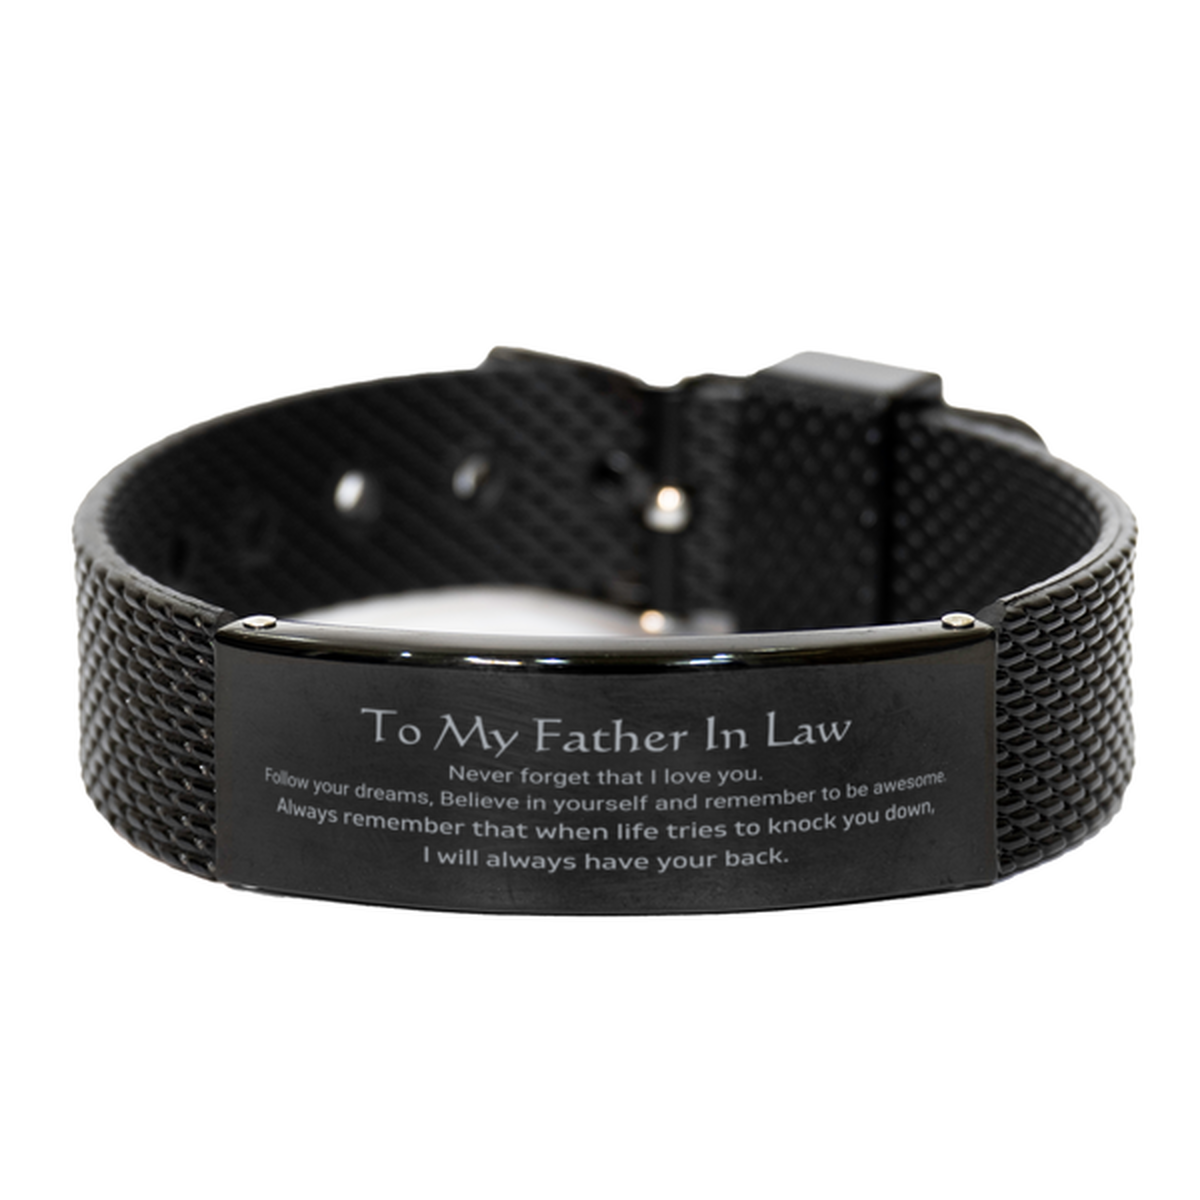 Inspirational Gifts for Father In Law, Follow your dreams, Believe in yourself, Father In Law Black Shark Mesh Bracelet, Birthday Christmas Unique Gifts For Father In Law